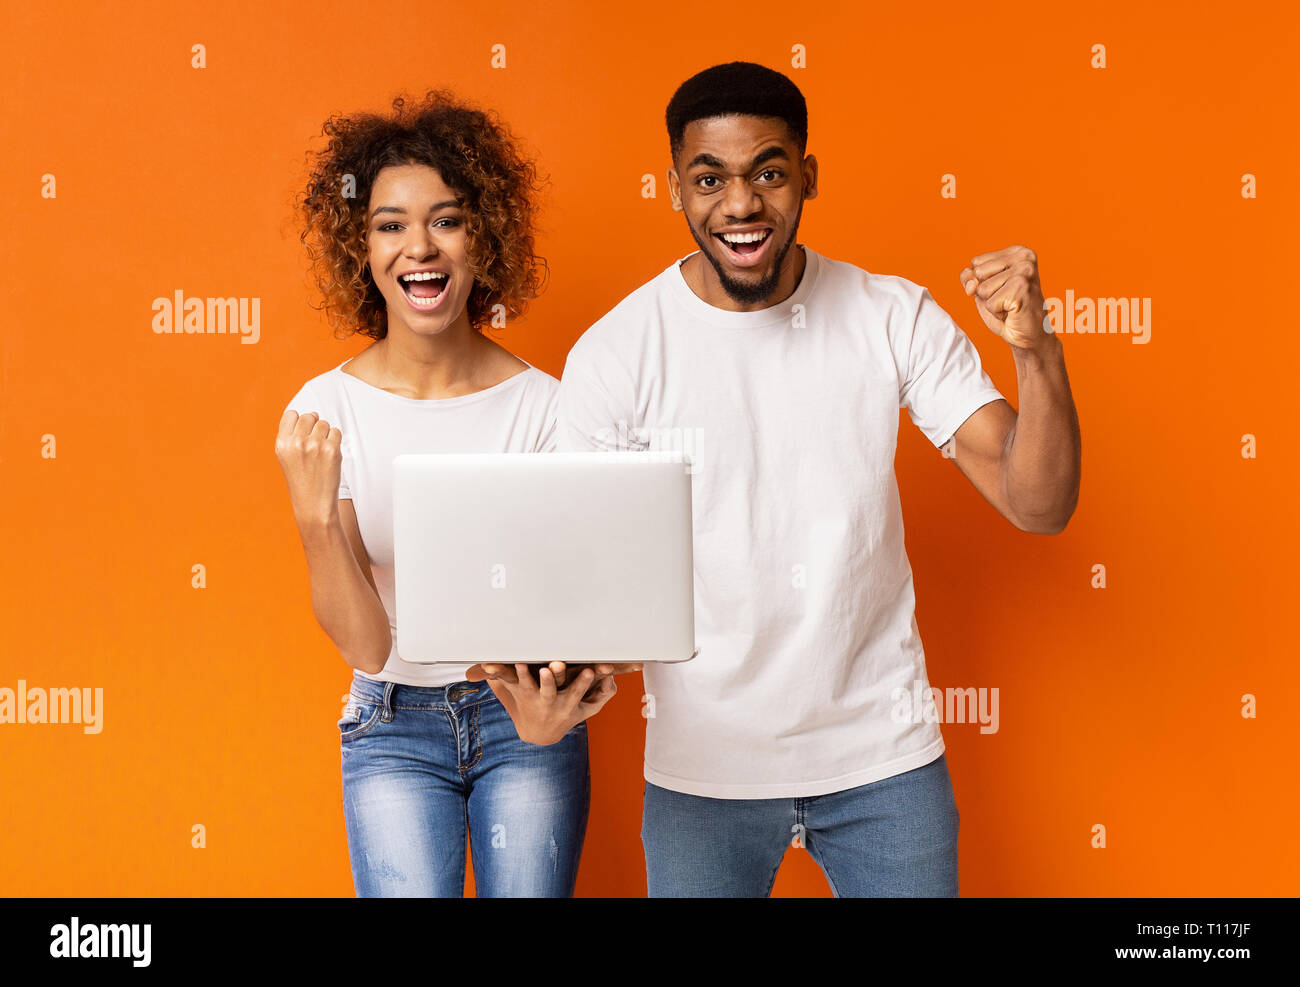 Excited black couple celebrating win with laptop Stock Photo